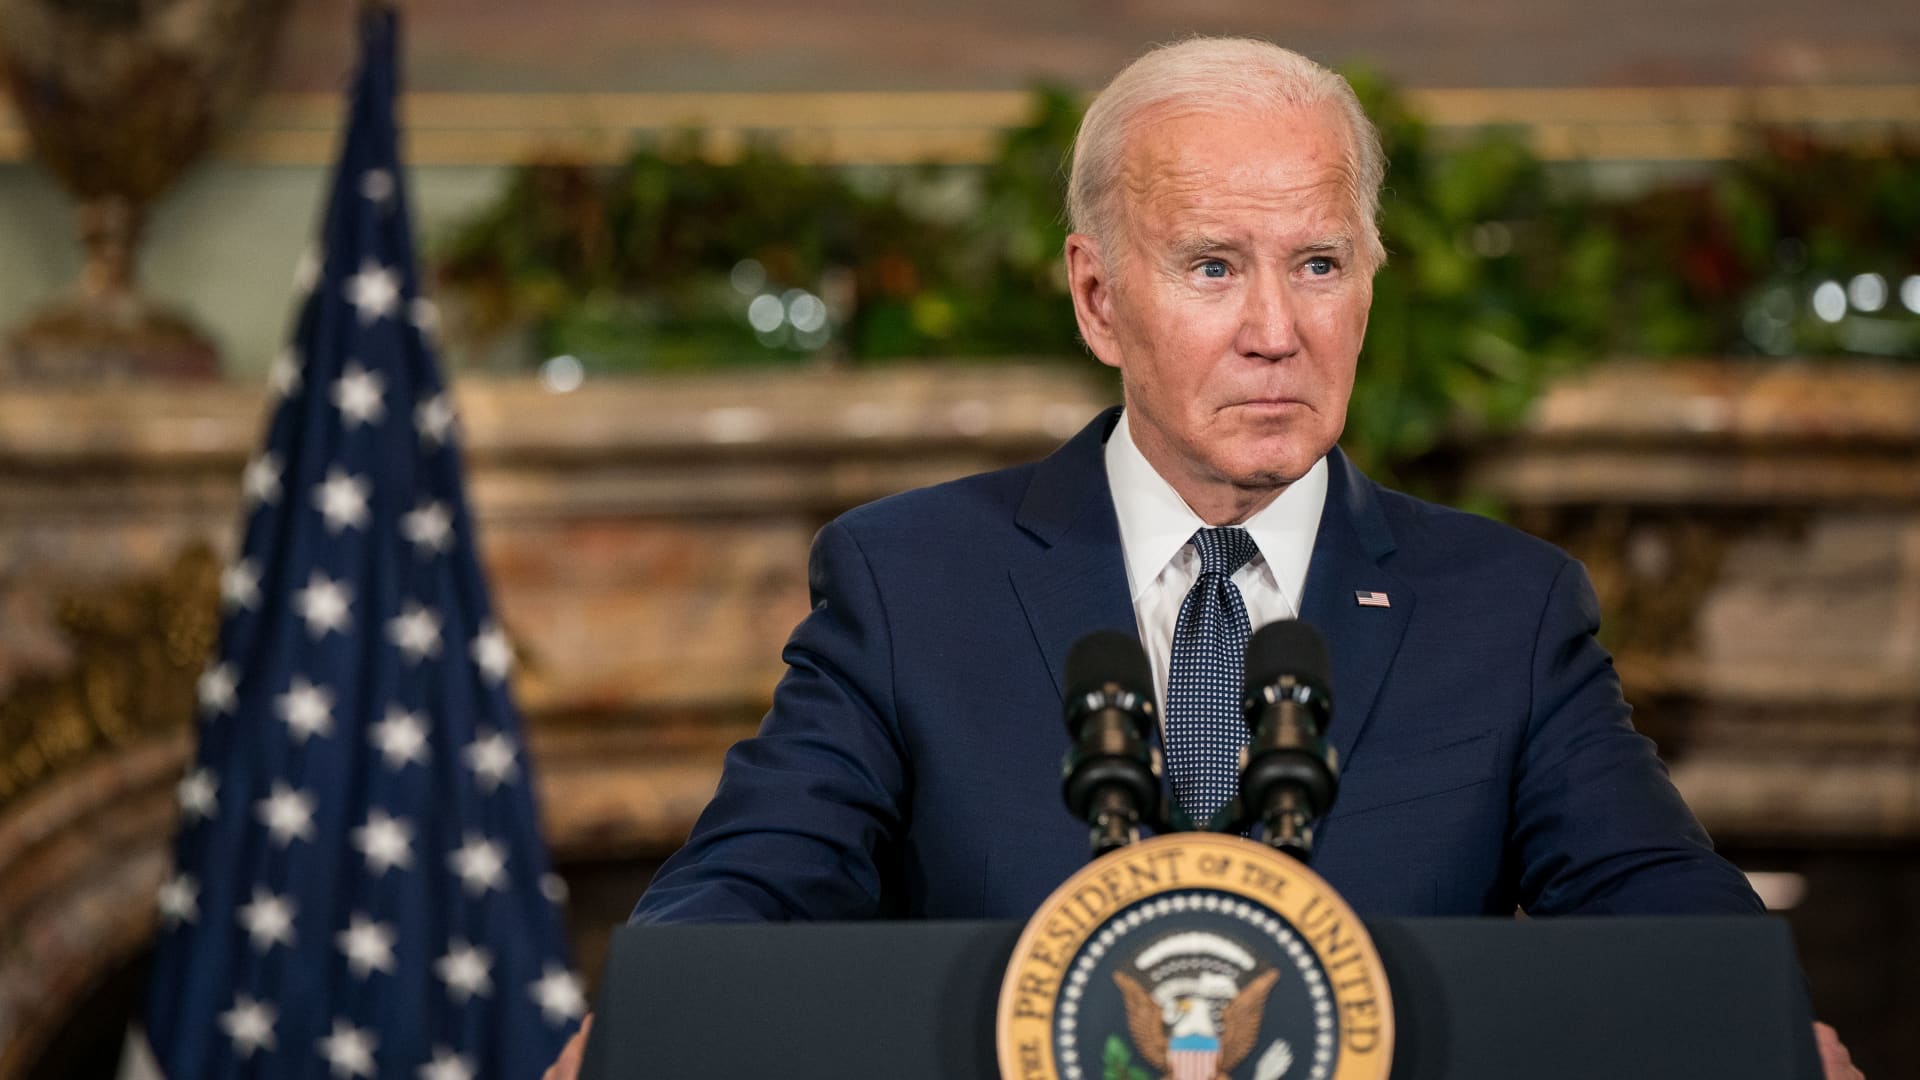 Biden stands by comment that Xi is a 'dictator'